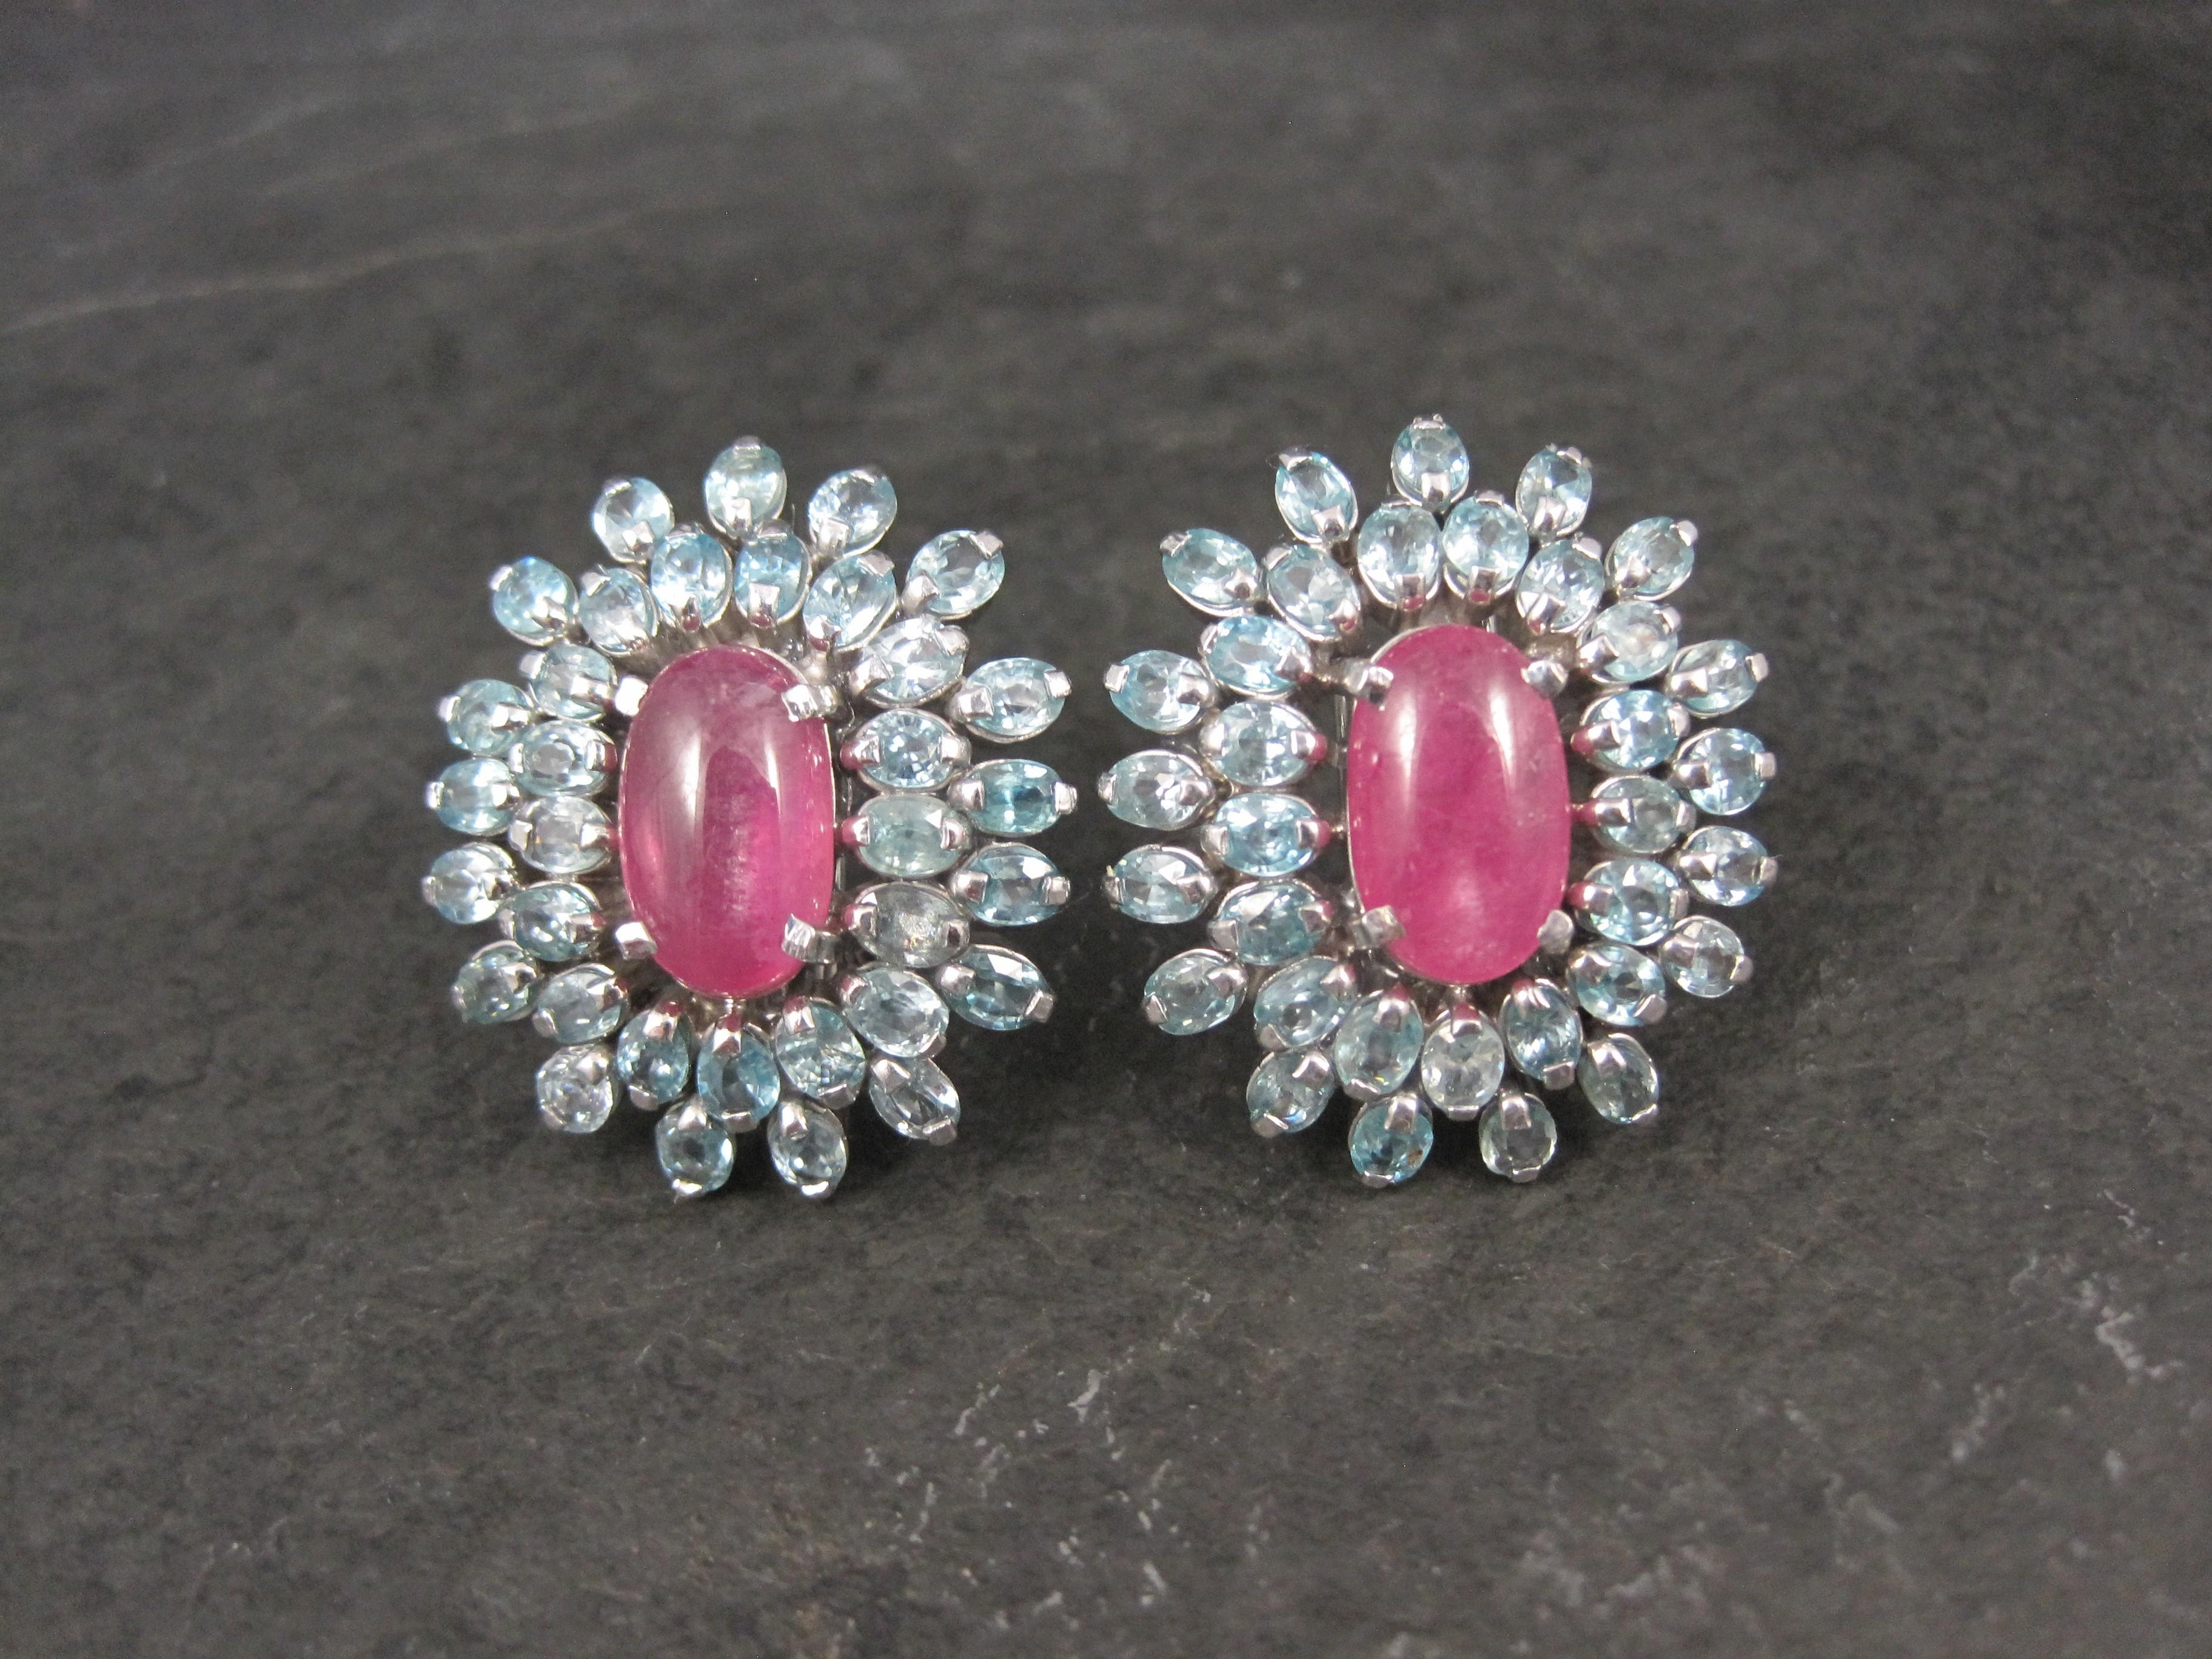 Large Sterling Silver Pink Sapphire Blue Topaz French Back Earrings In Excellent Condition For Sale In Webster, SD